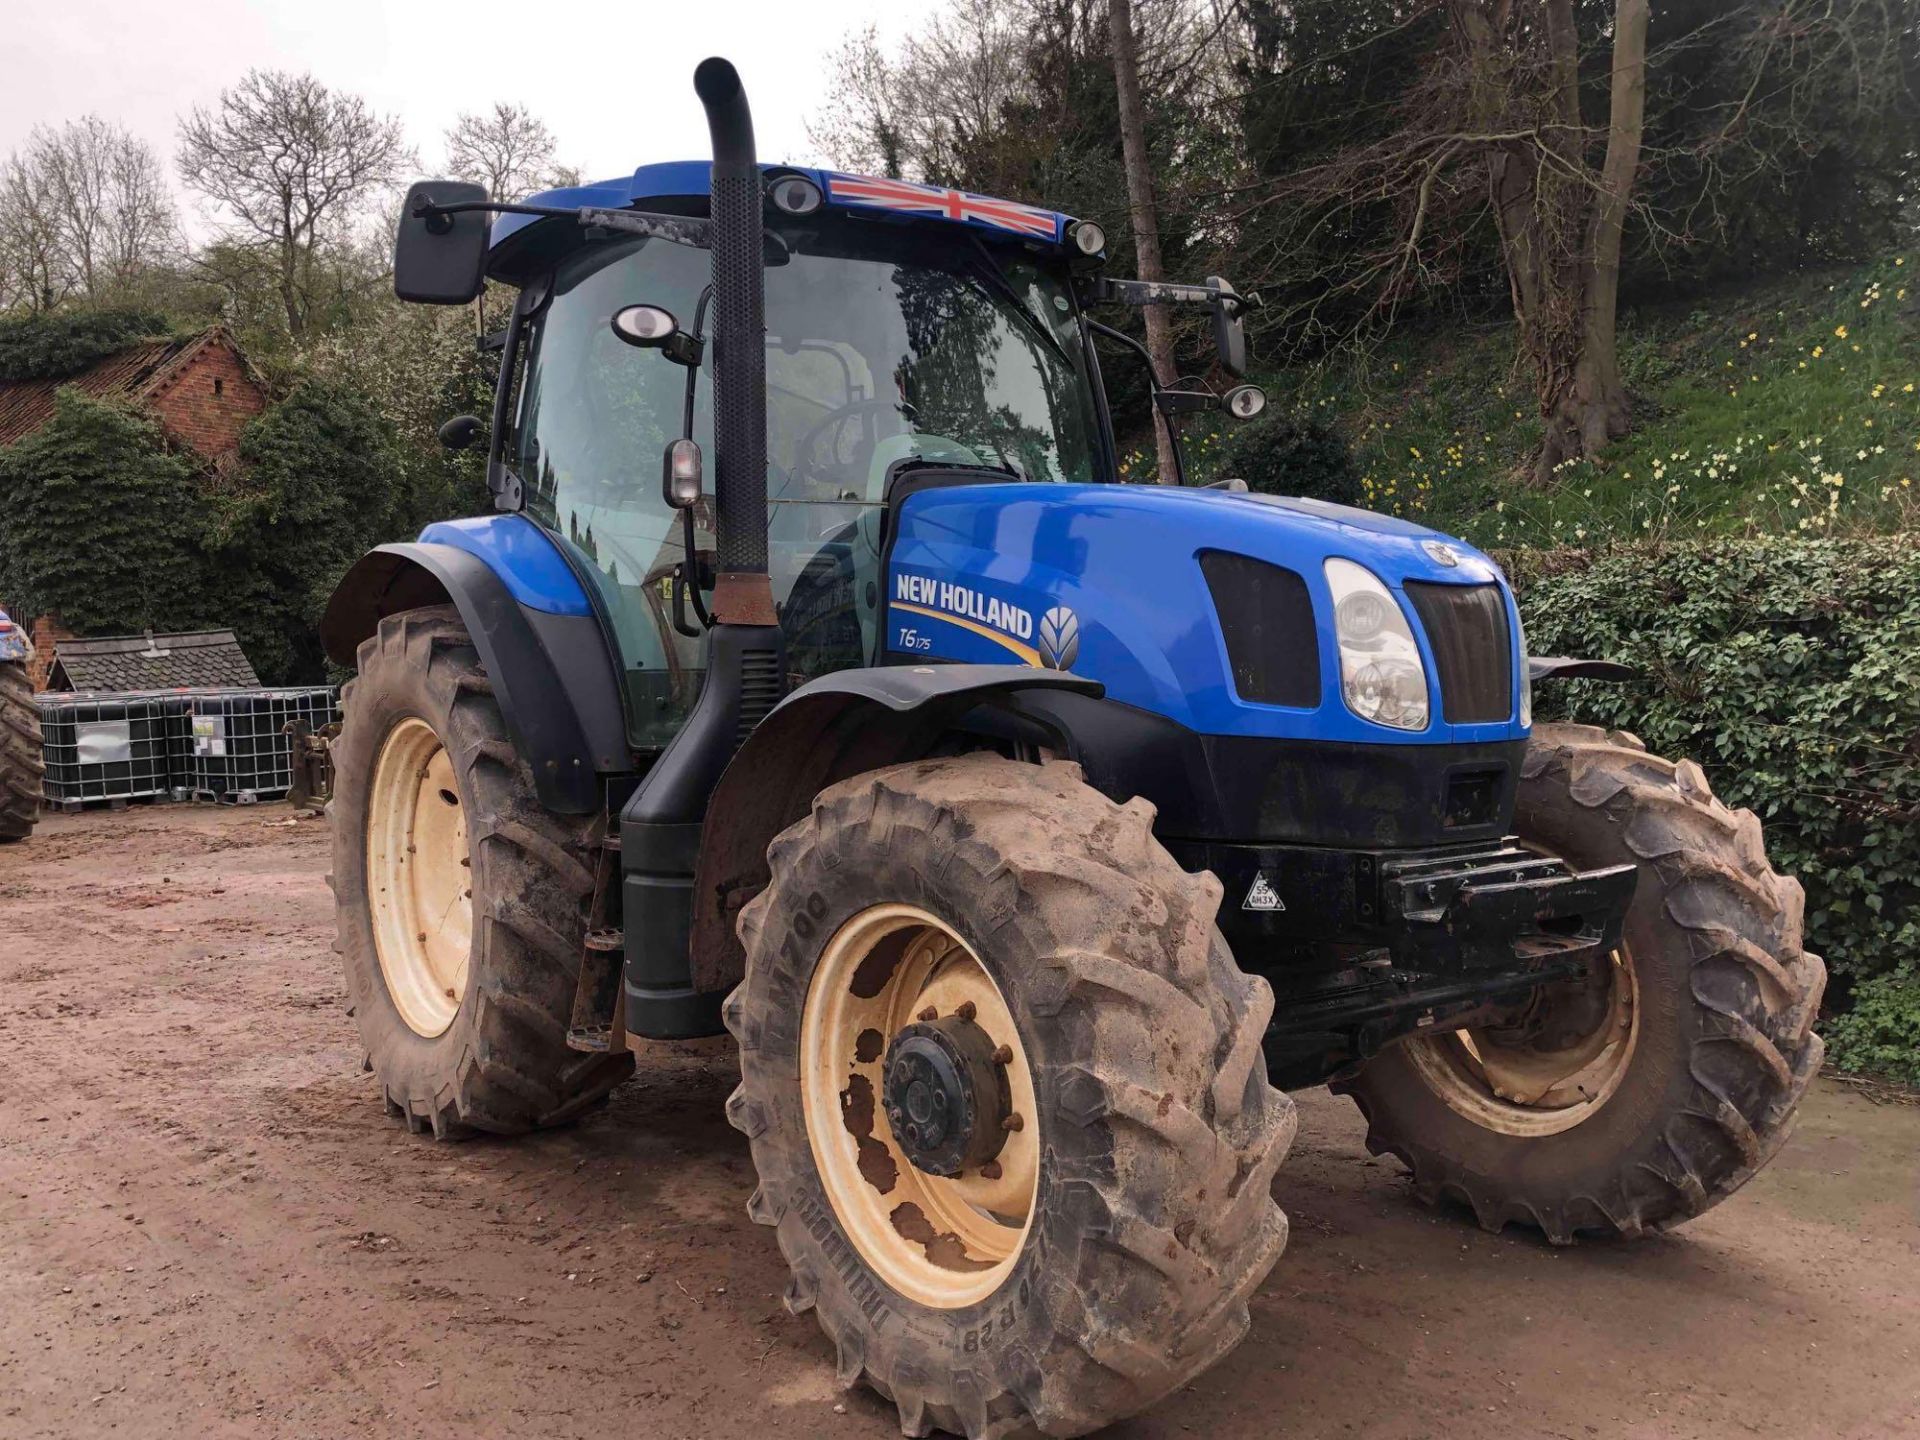 2013 New Holland T6.175 4wd tractor, 3 manual spools, air, on 420/70R28 front and 520/70R38 rear whe - Image 6 of 26